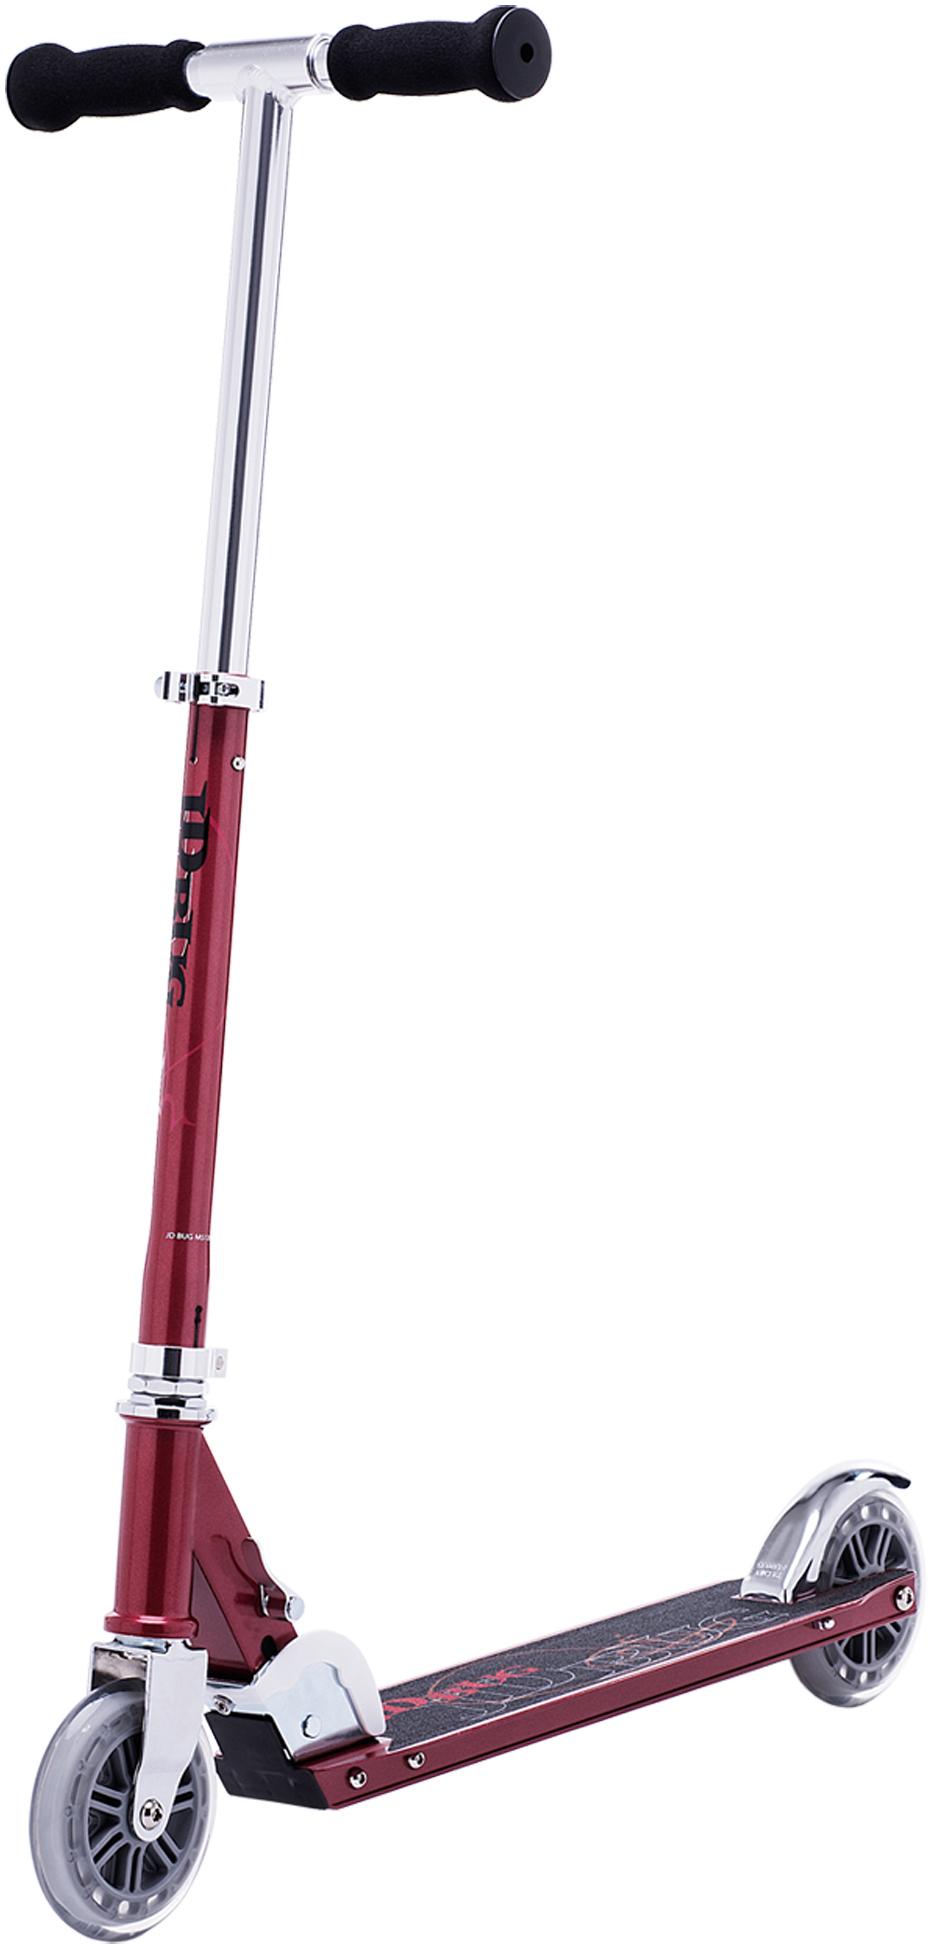 Jd Bug Classic Street 120 Scooter - Red Pearl